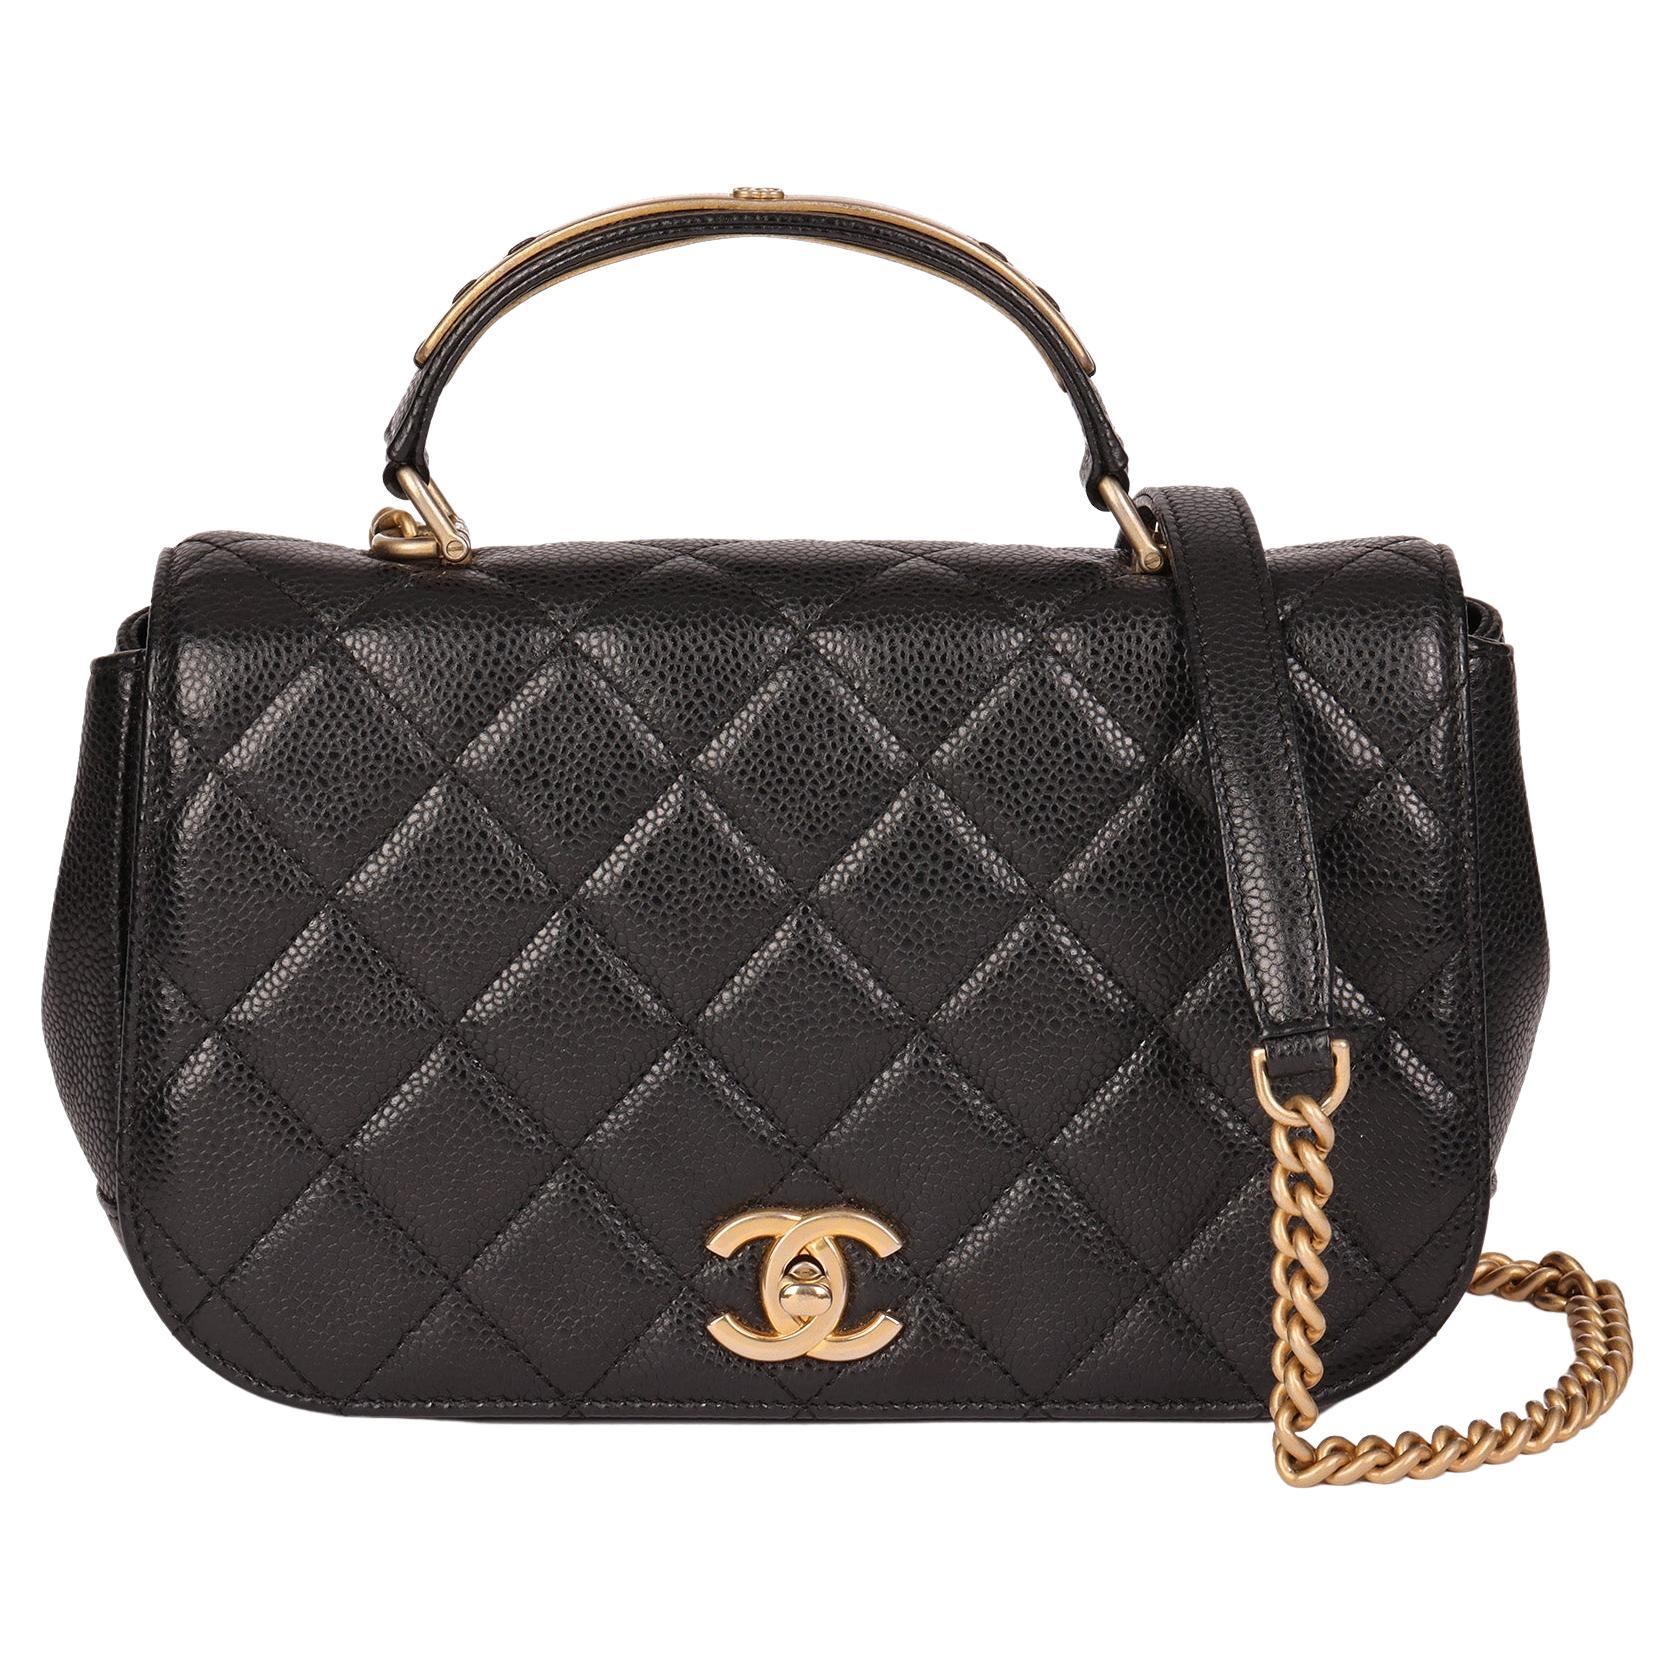 CHANEL Black Quilted Caviar Leather Medium Classic Top Handle Flap